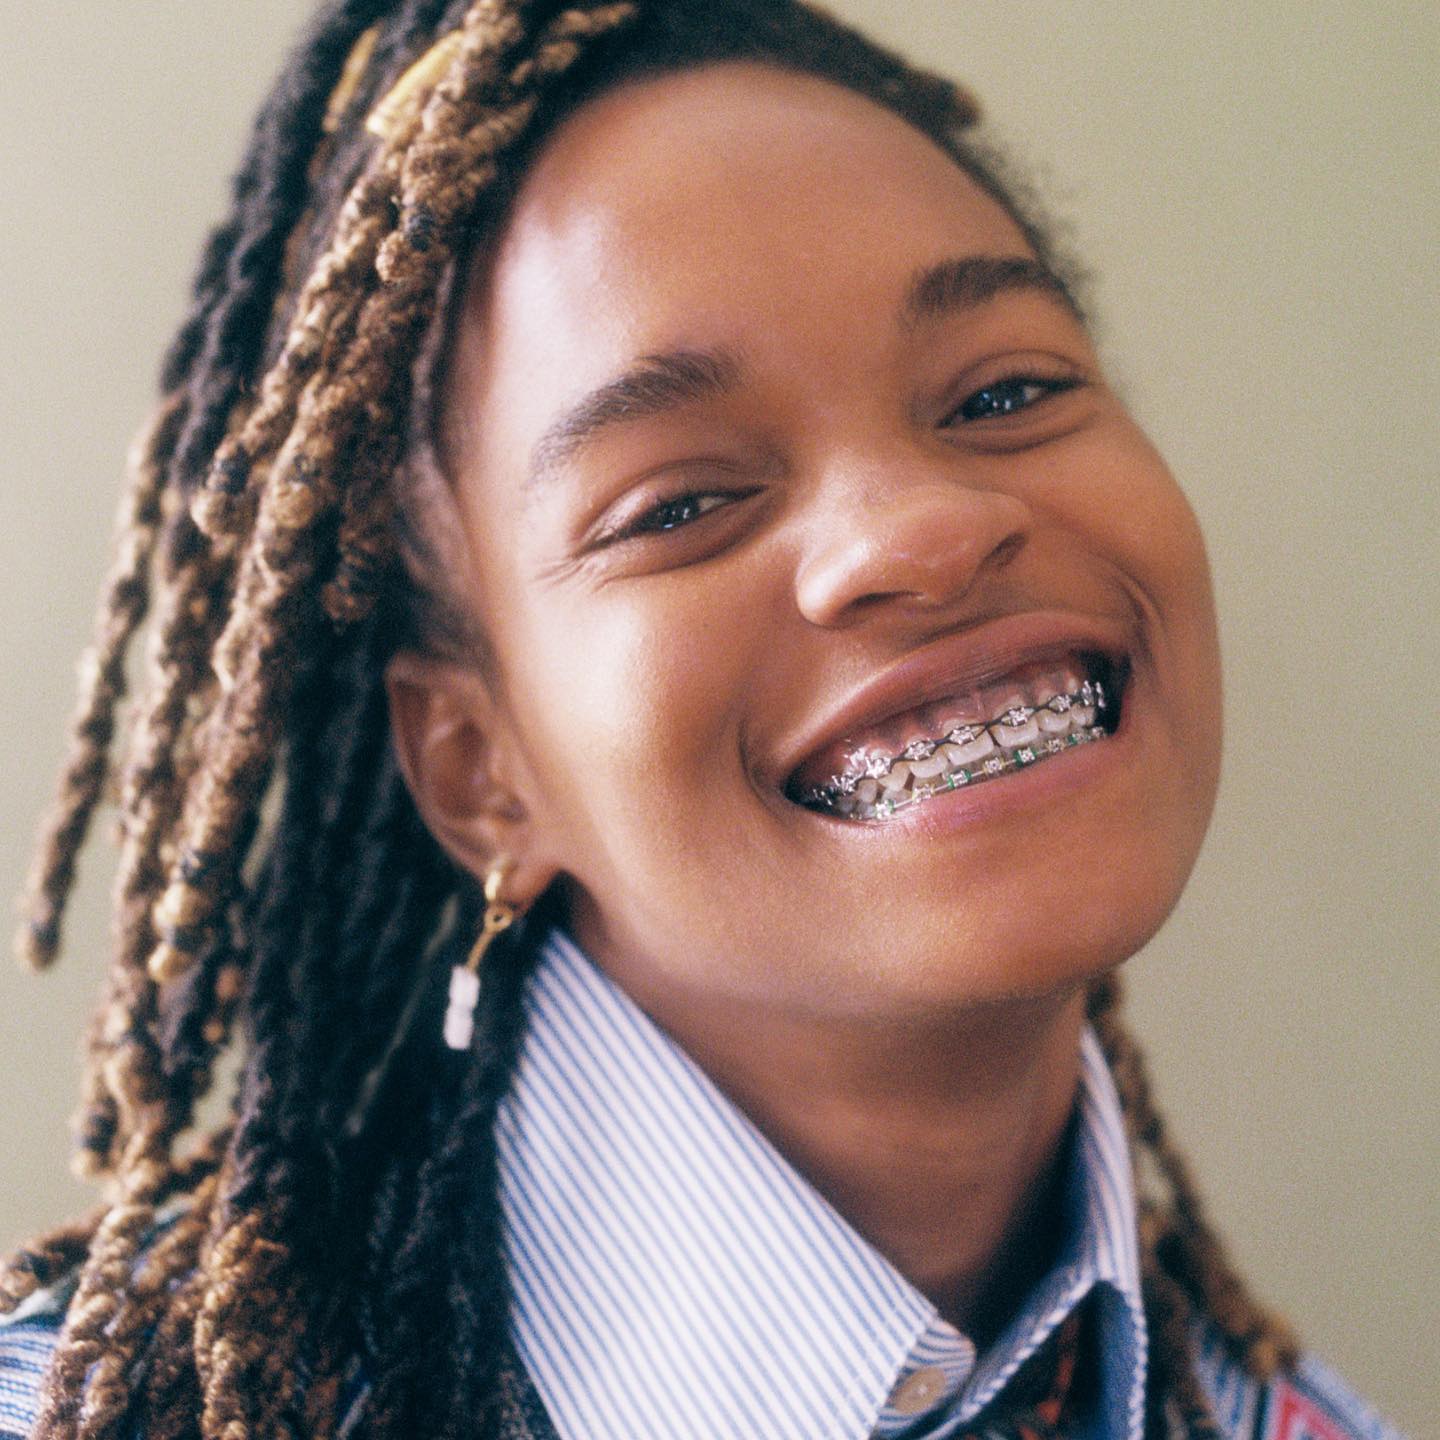 Koffee announces her debut album title “Gifted”